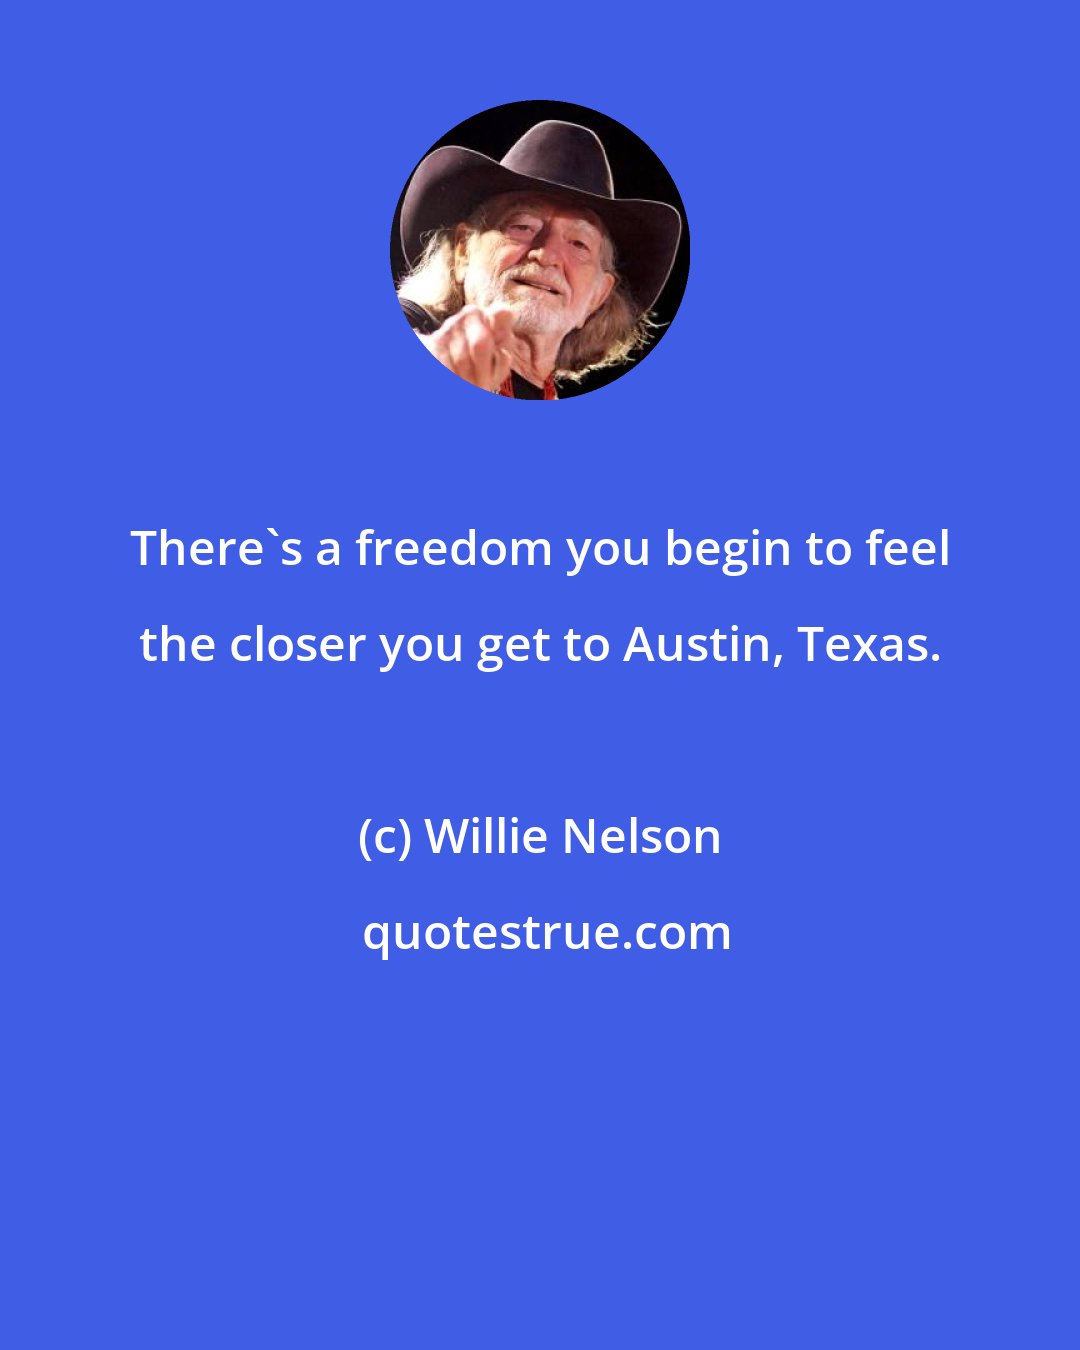 Willie Nelson: There's a freedom you begin to feel the closer you get to Austin, Texas.